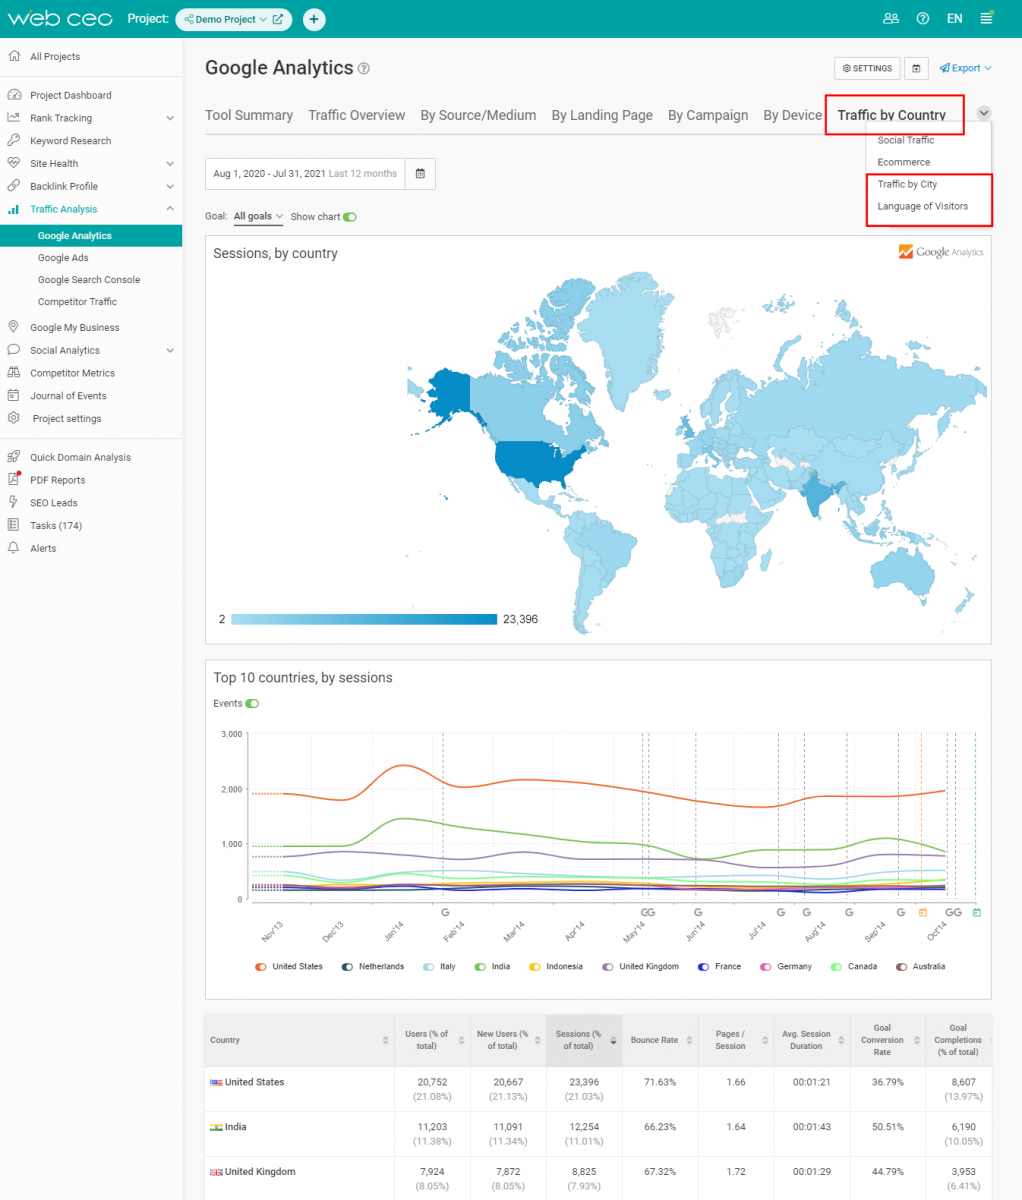 The WebCEO Google Analytics Module - Traffic by Country